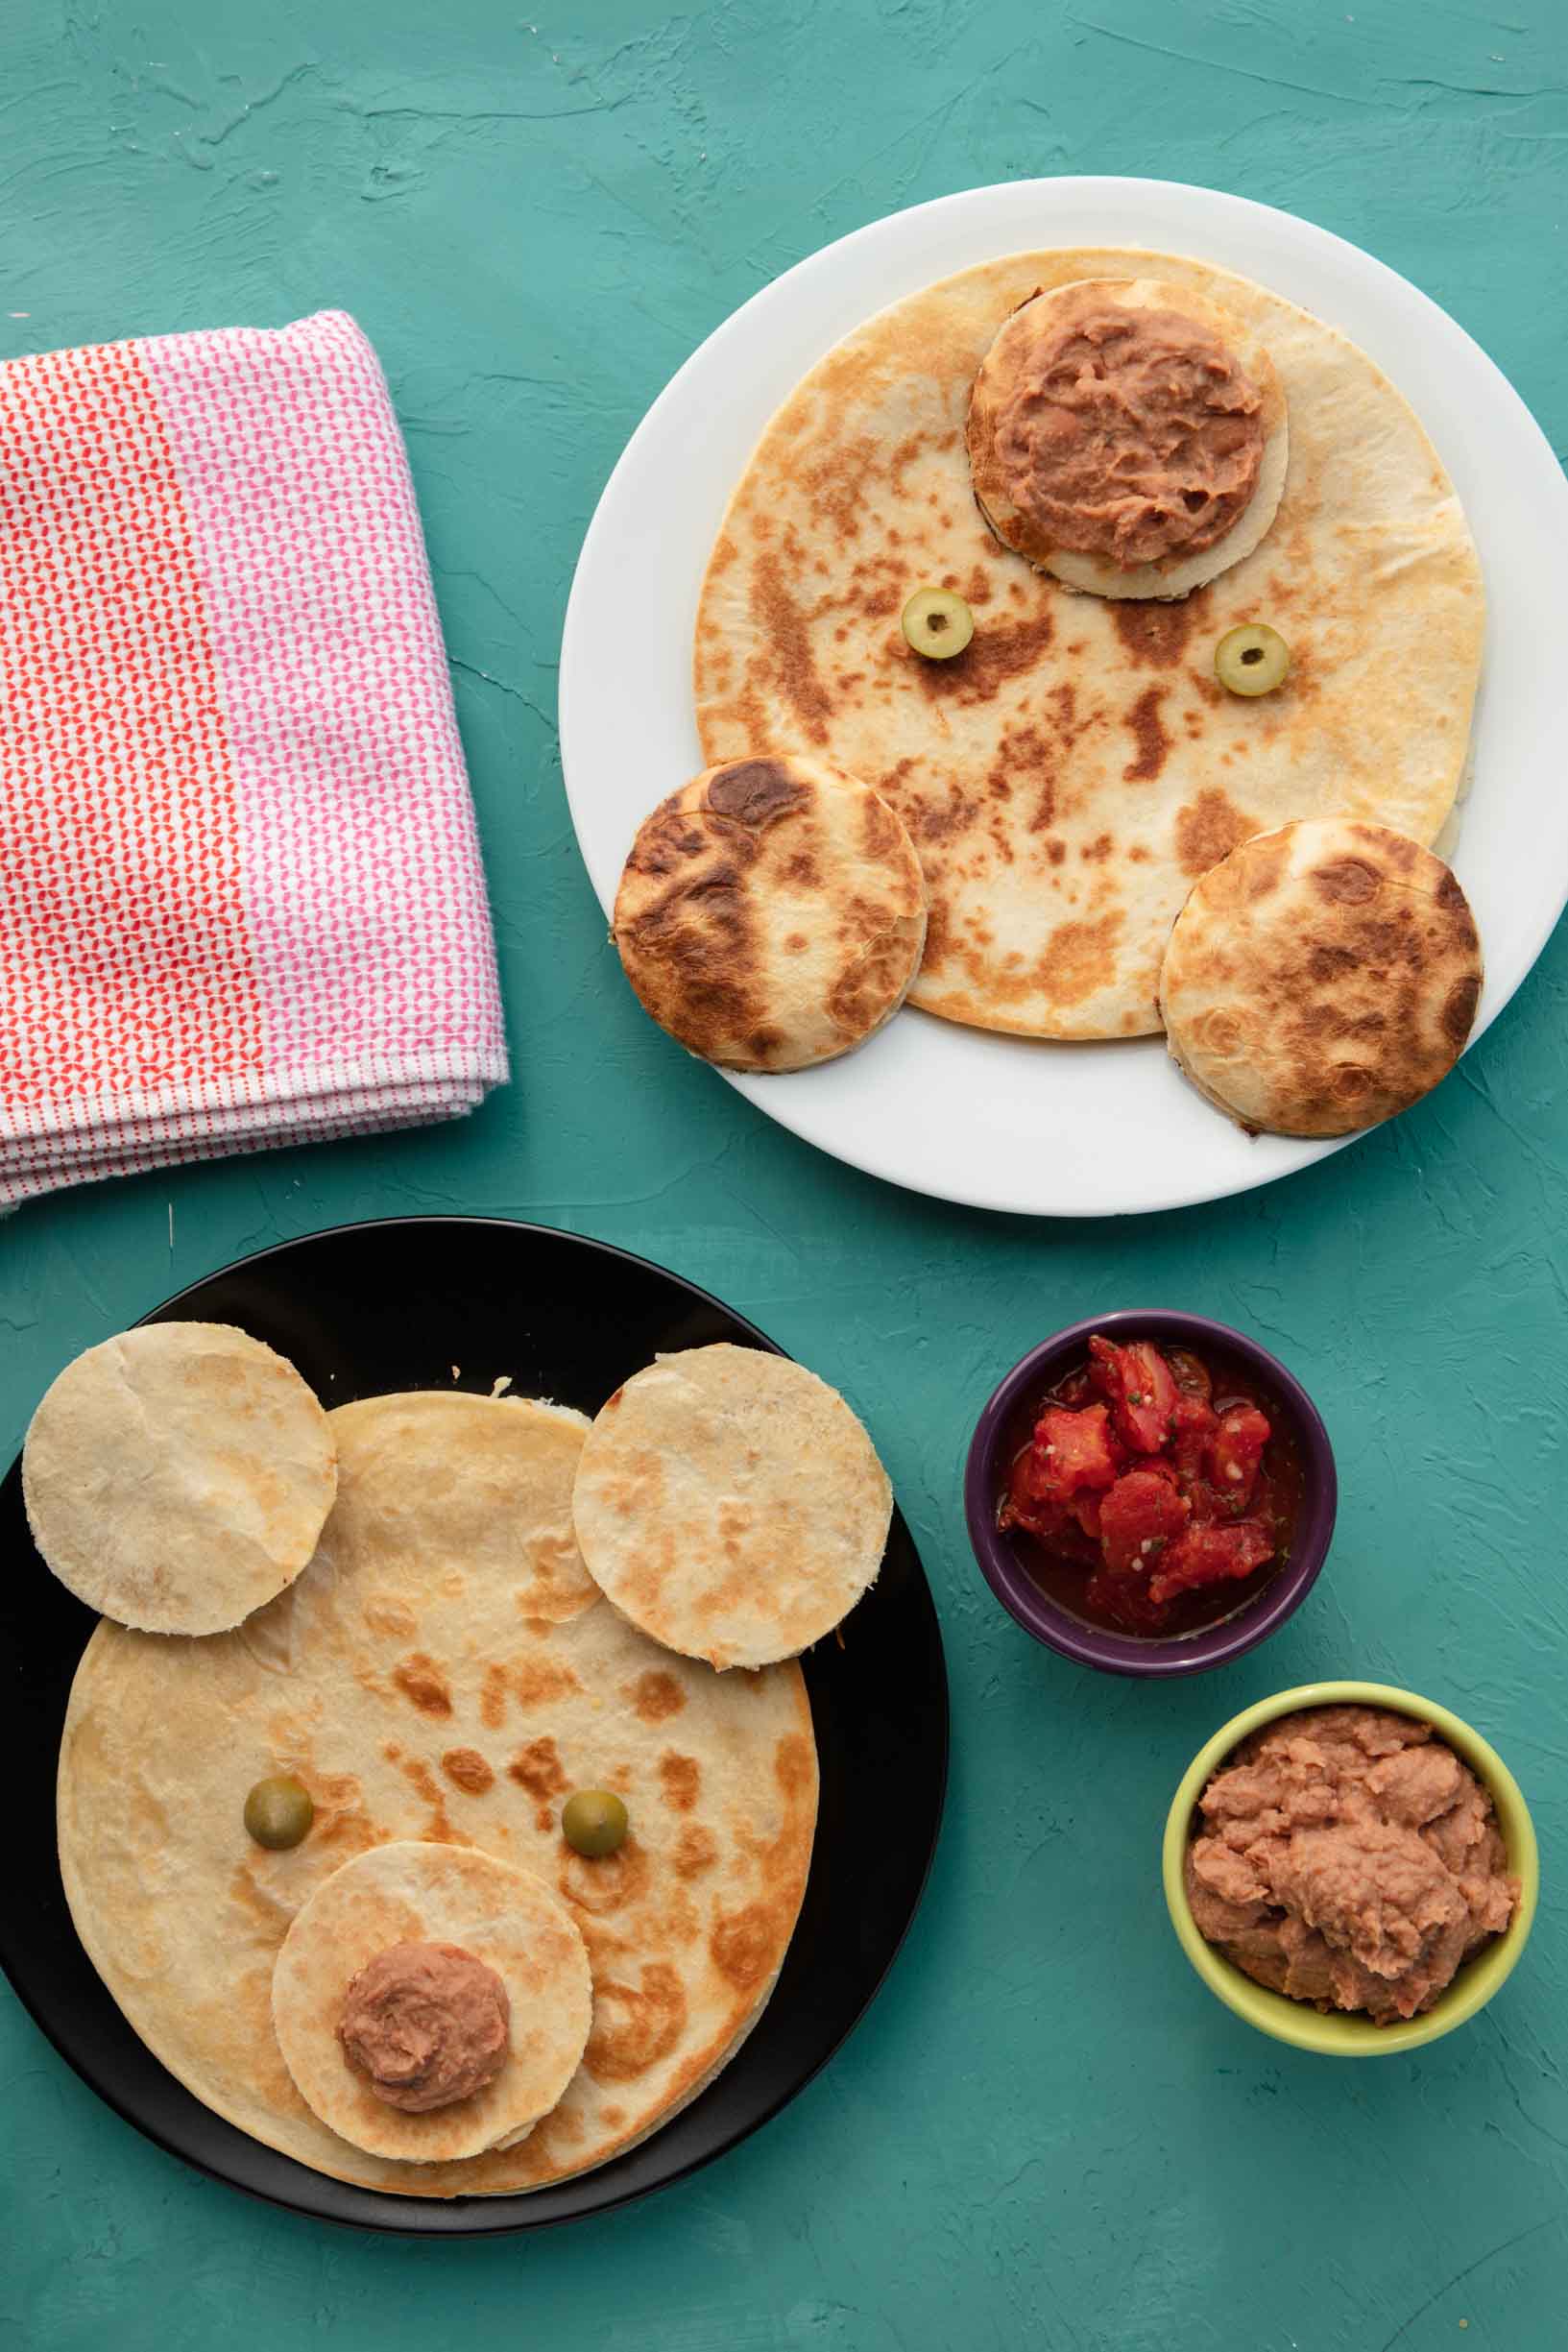 two vegan quesadillas that are decorated like bear faces, served on a table with small bowls of dip